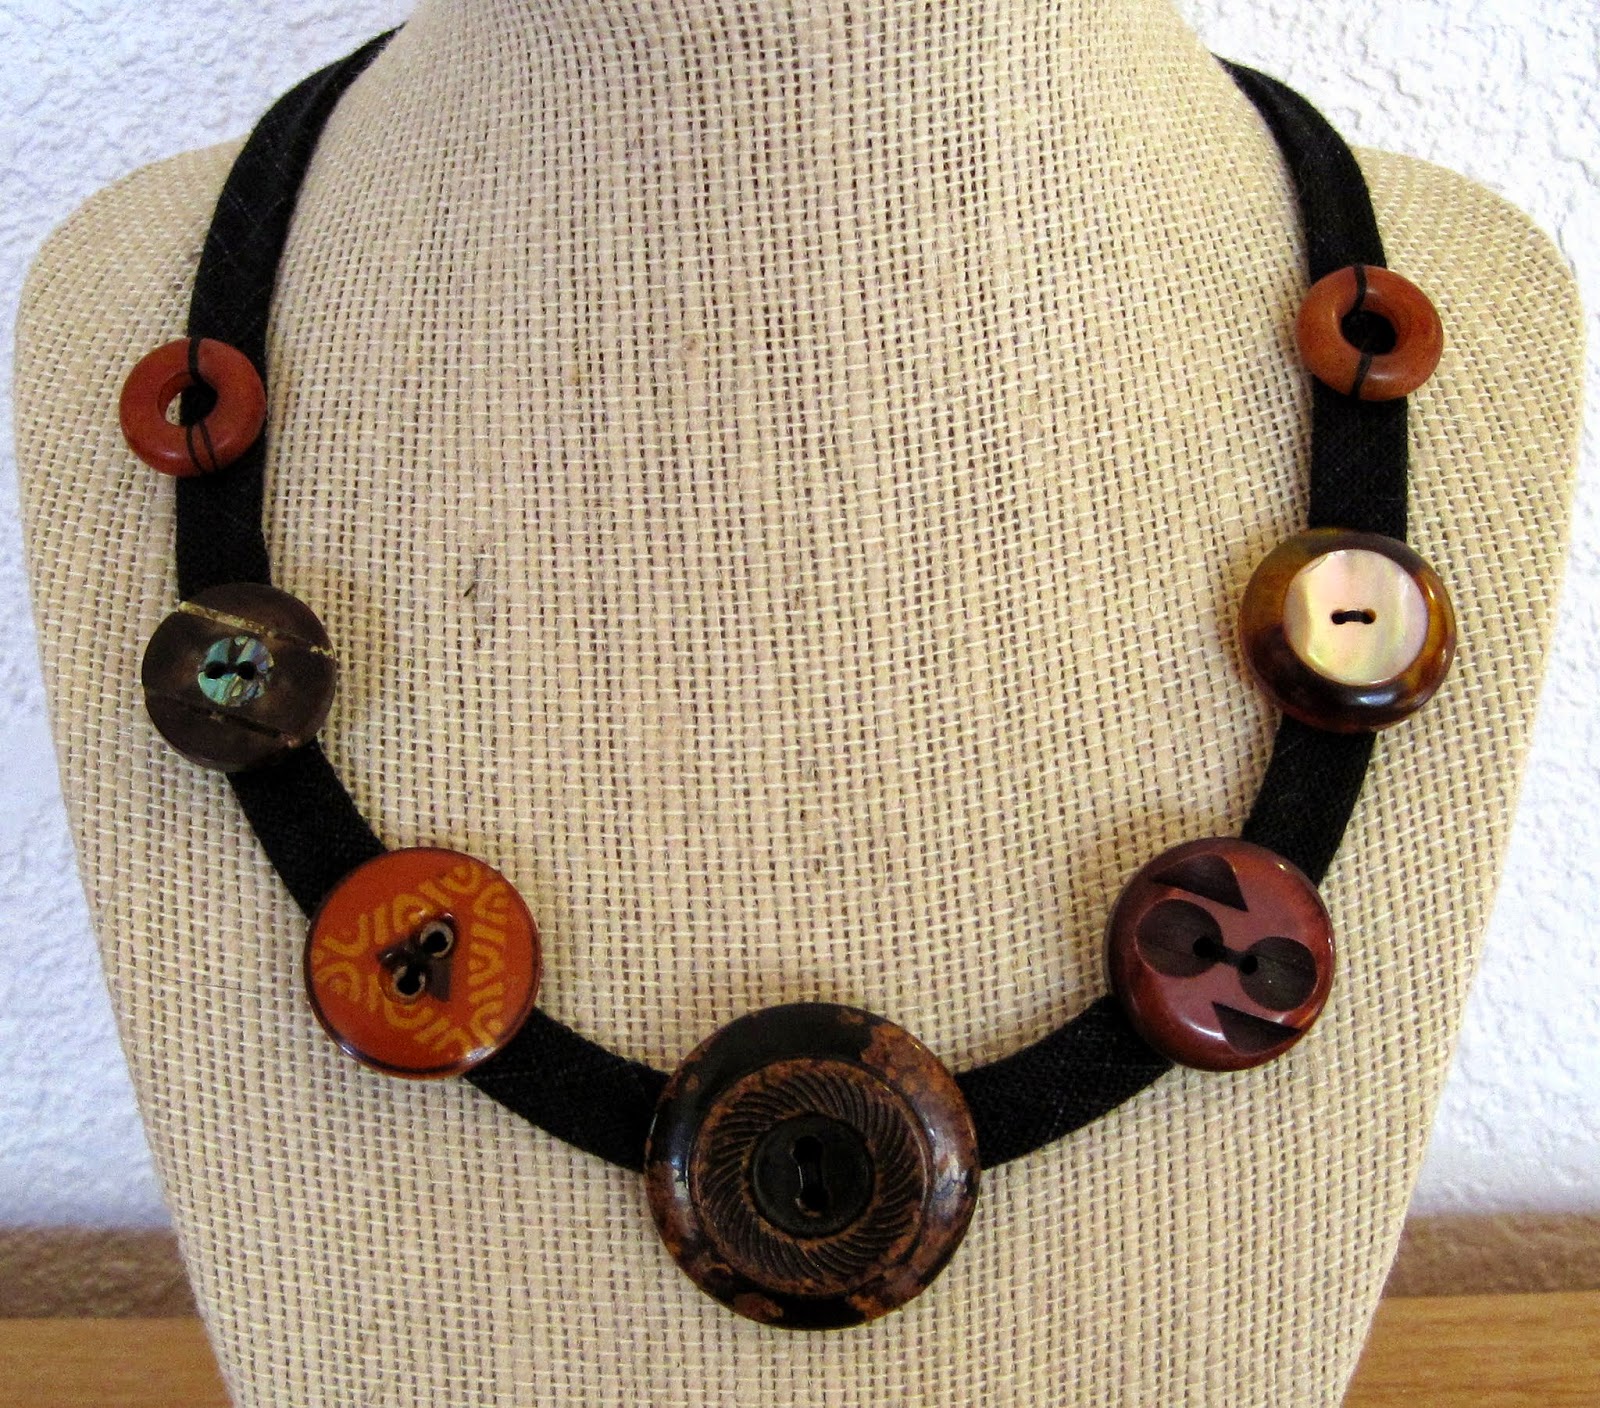 Alison's arts: vintage button necklaces and spirit dolls: It's February ...